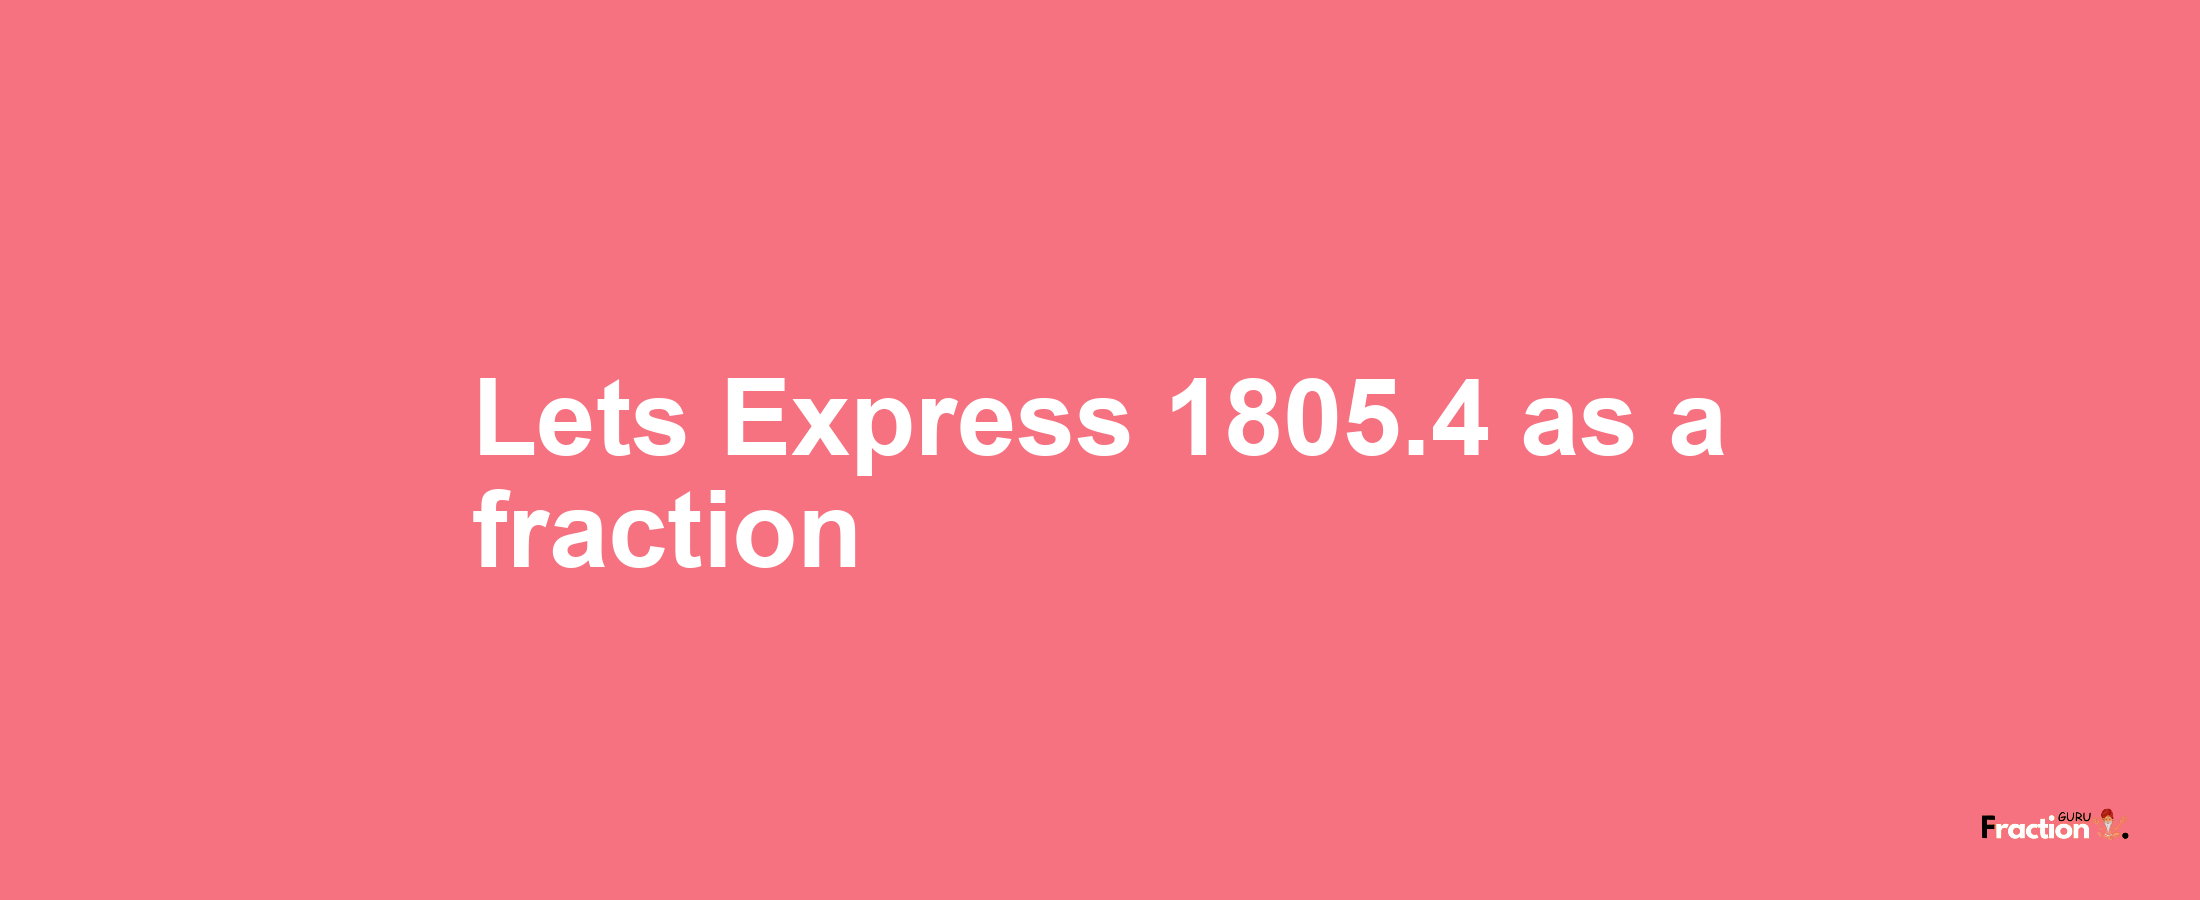 Lets Express 1805.4 as afraction